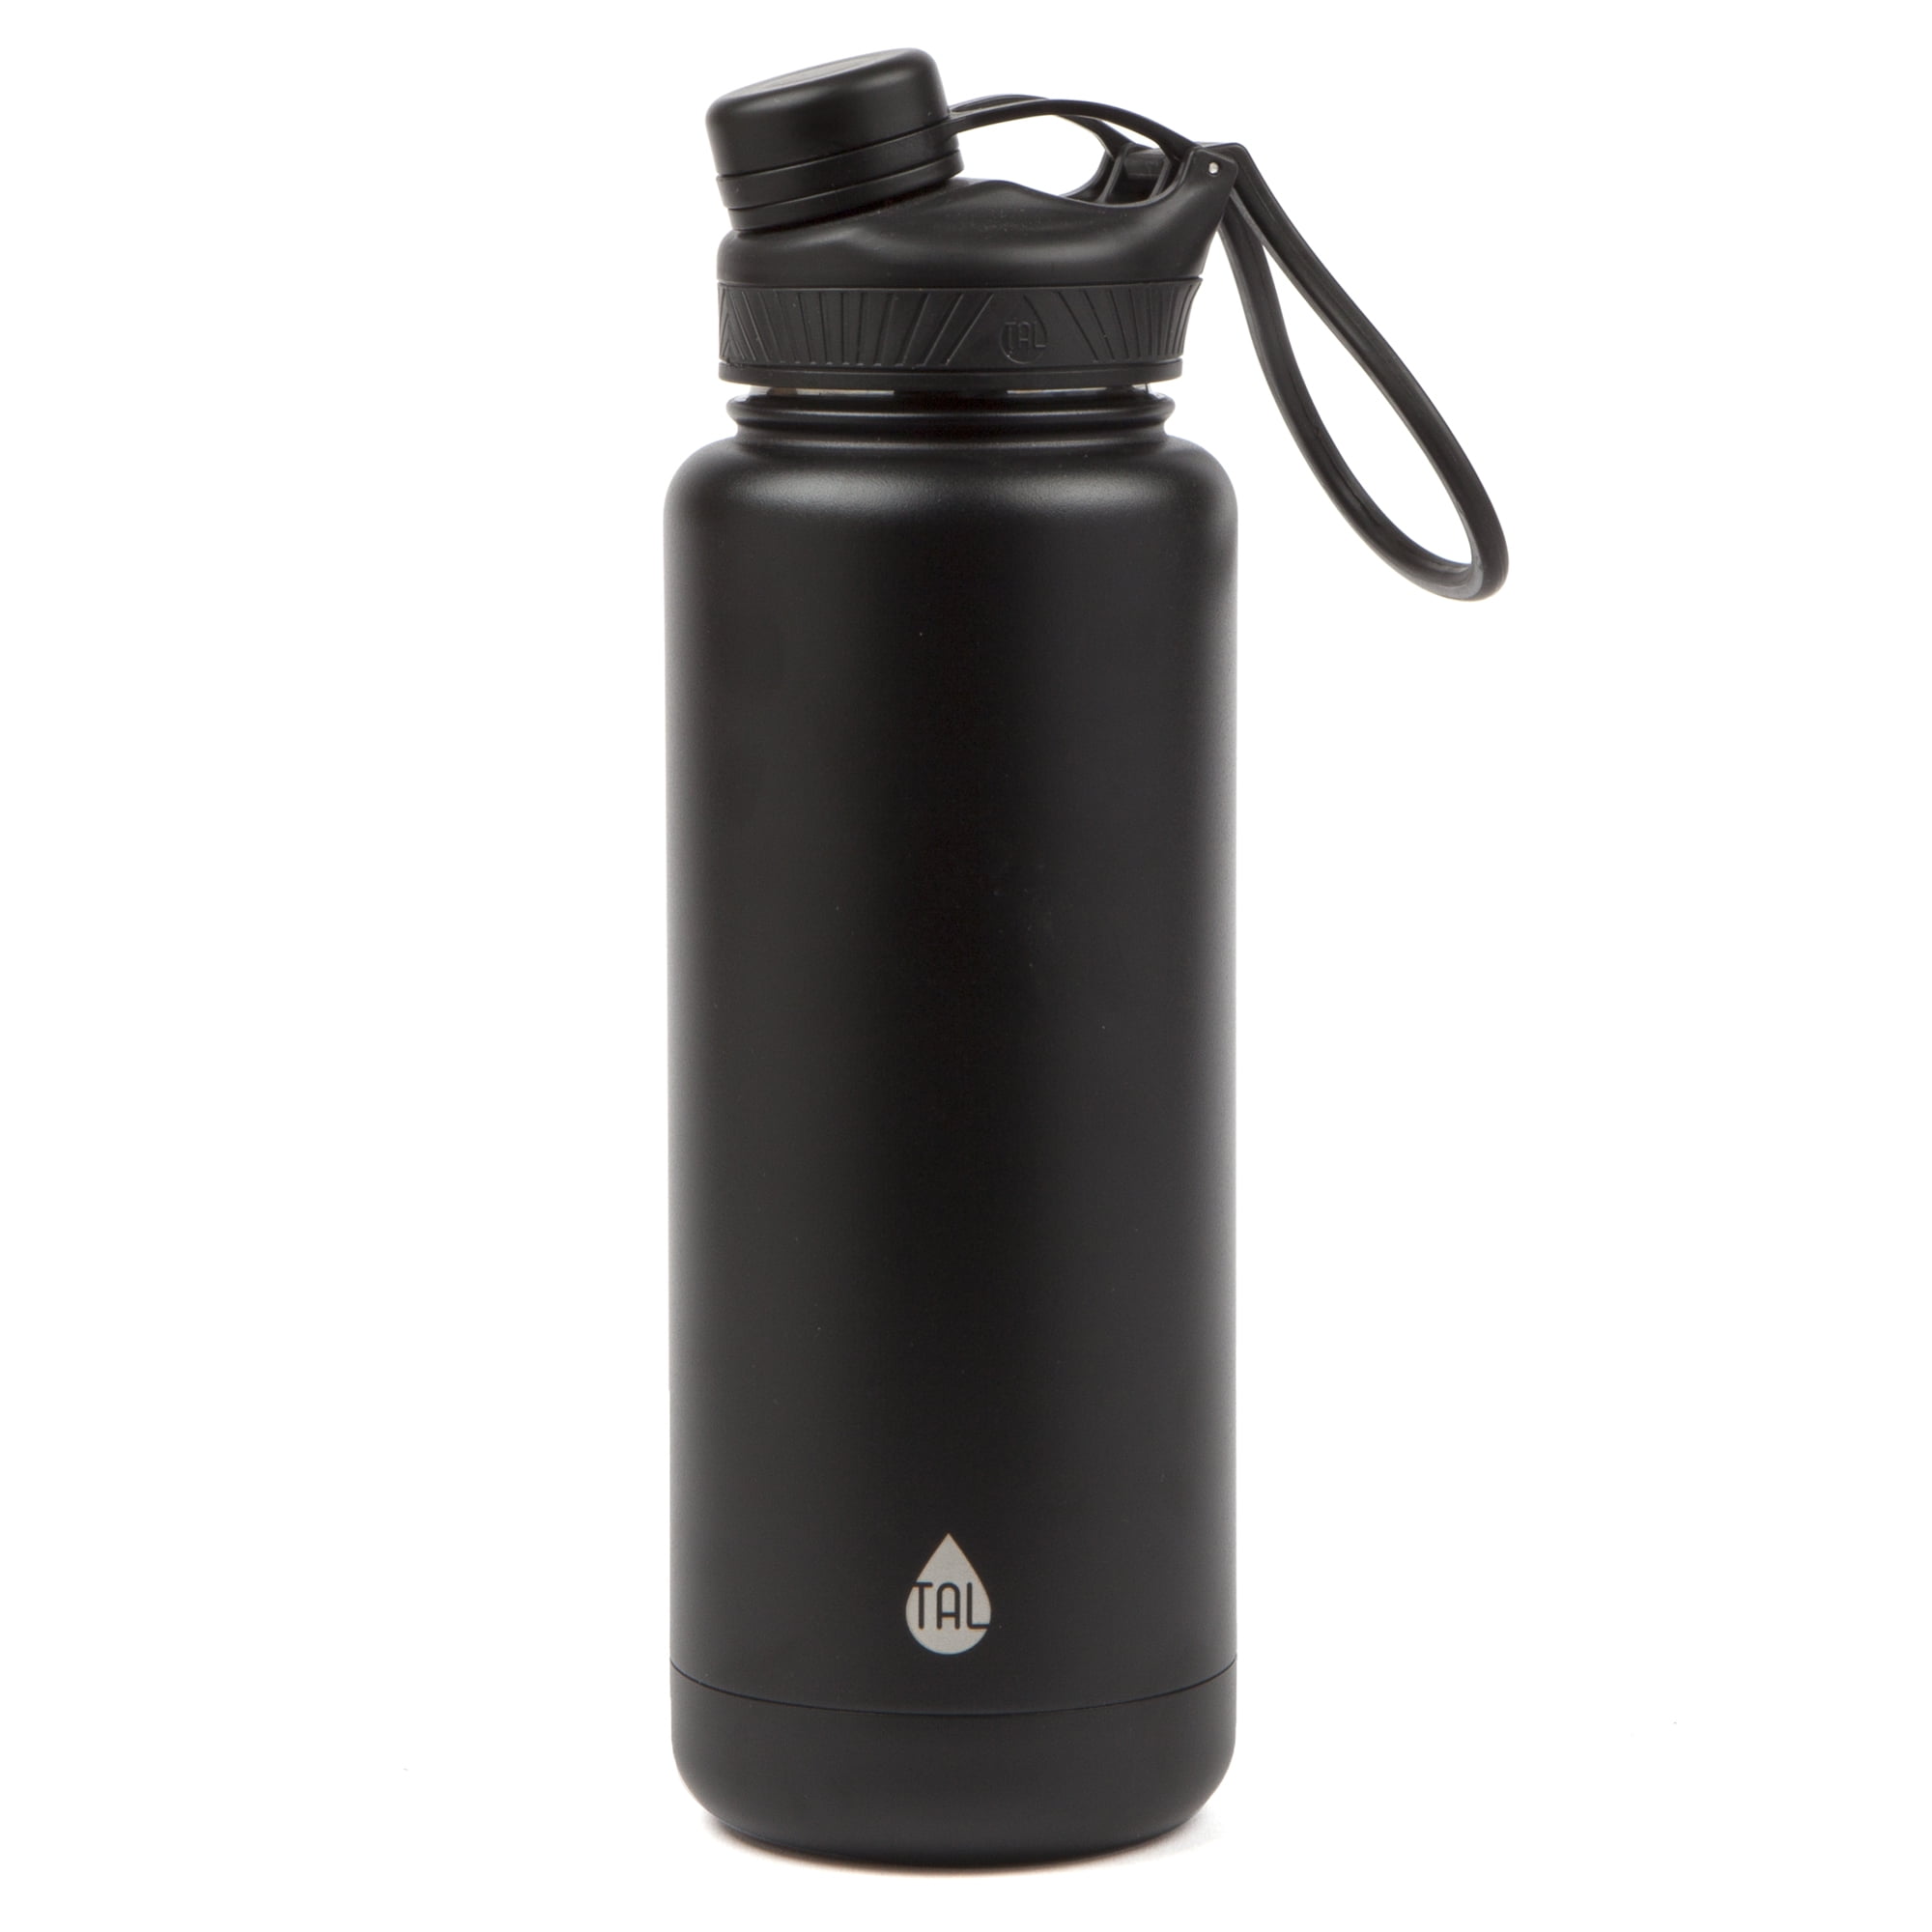 Tal 40 Ounce Double Wall Vacuum Insulated Stainless Steel Ranger Pro Tal Water Bottle Stainless Steel